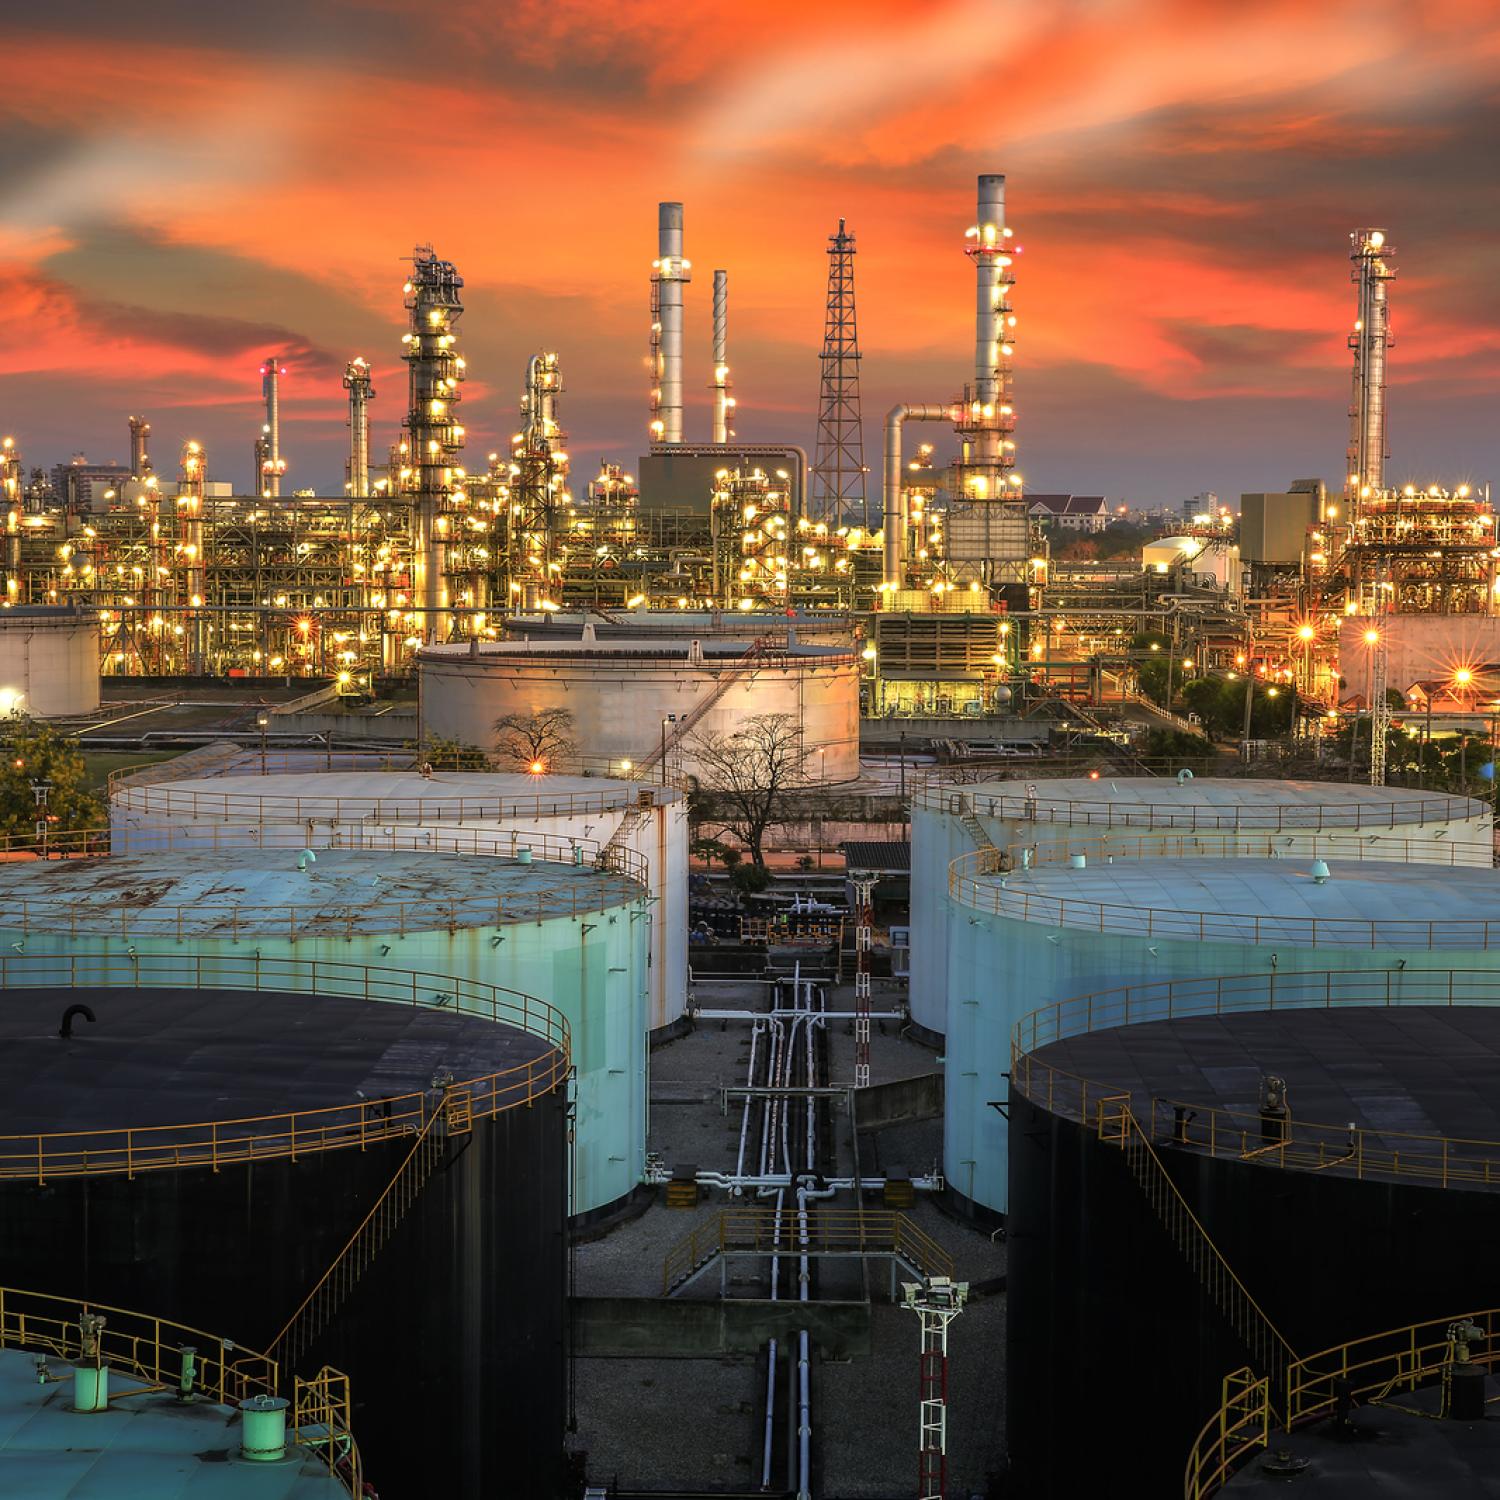 Photo of an oil refinery.